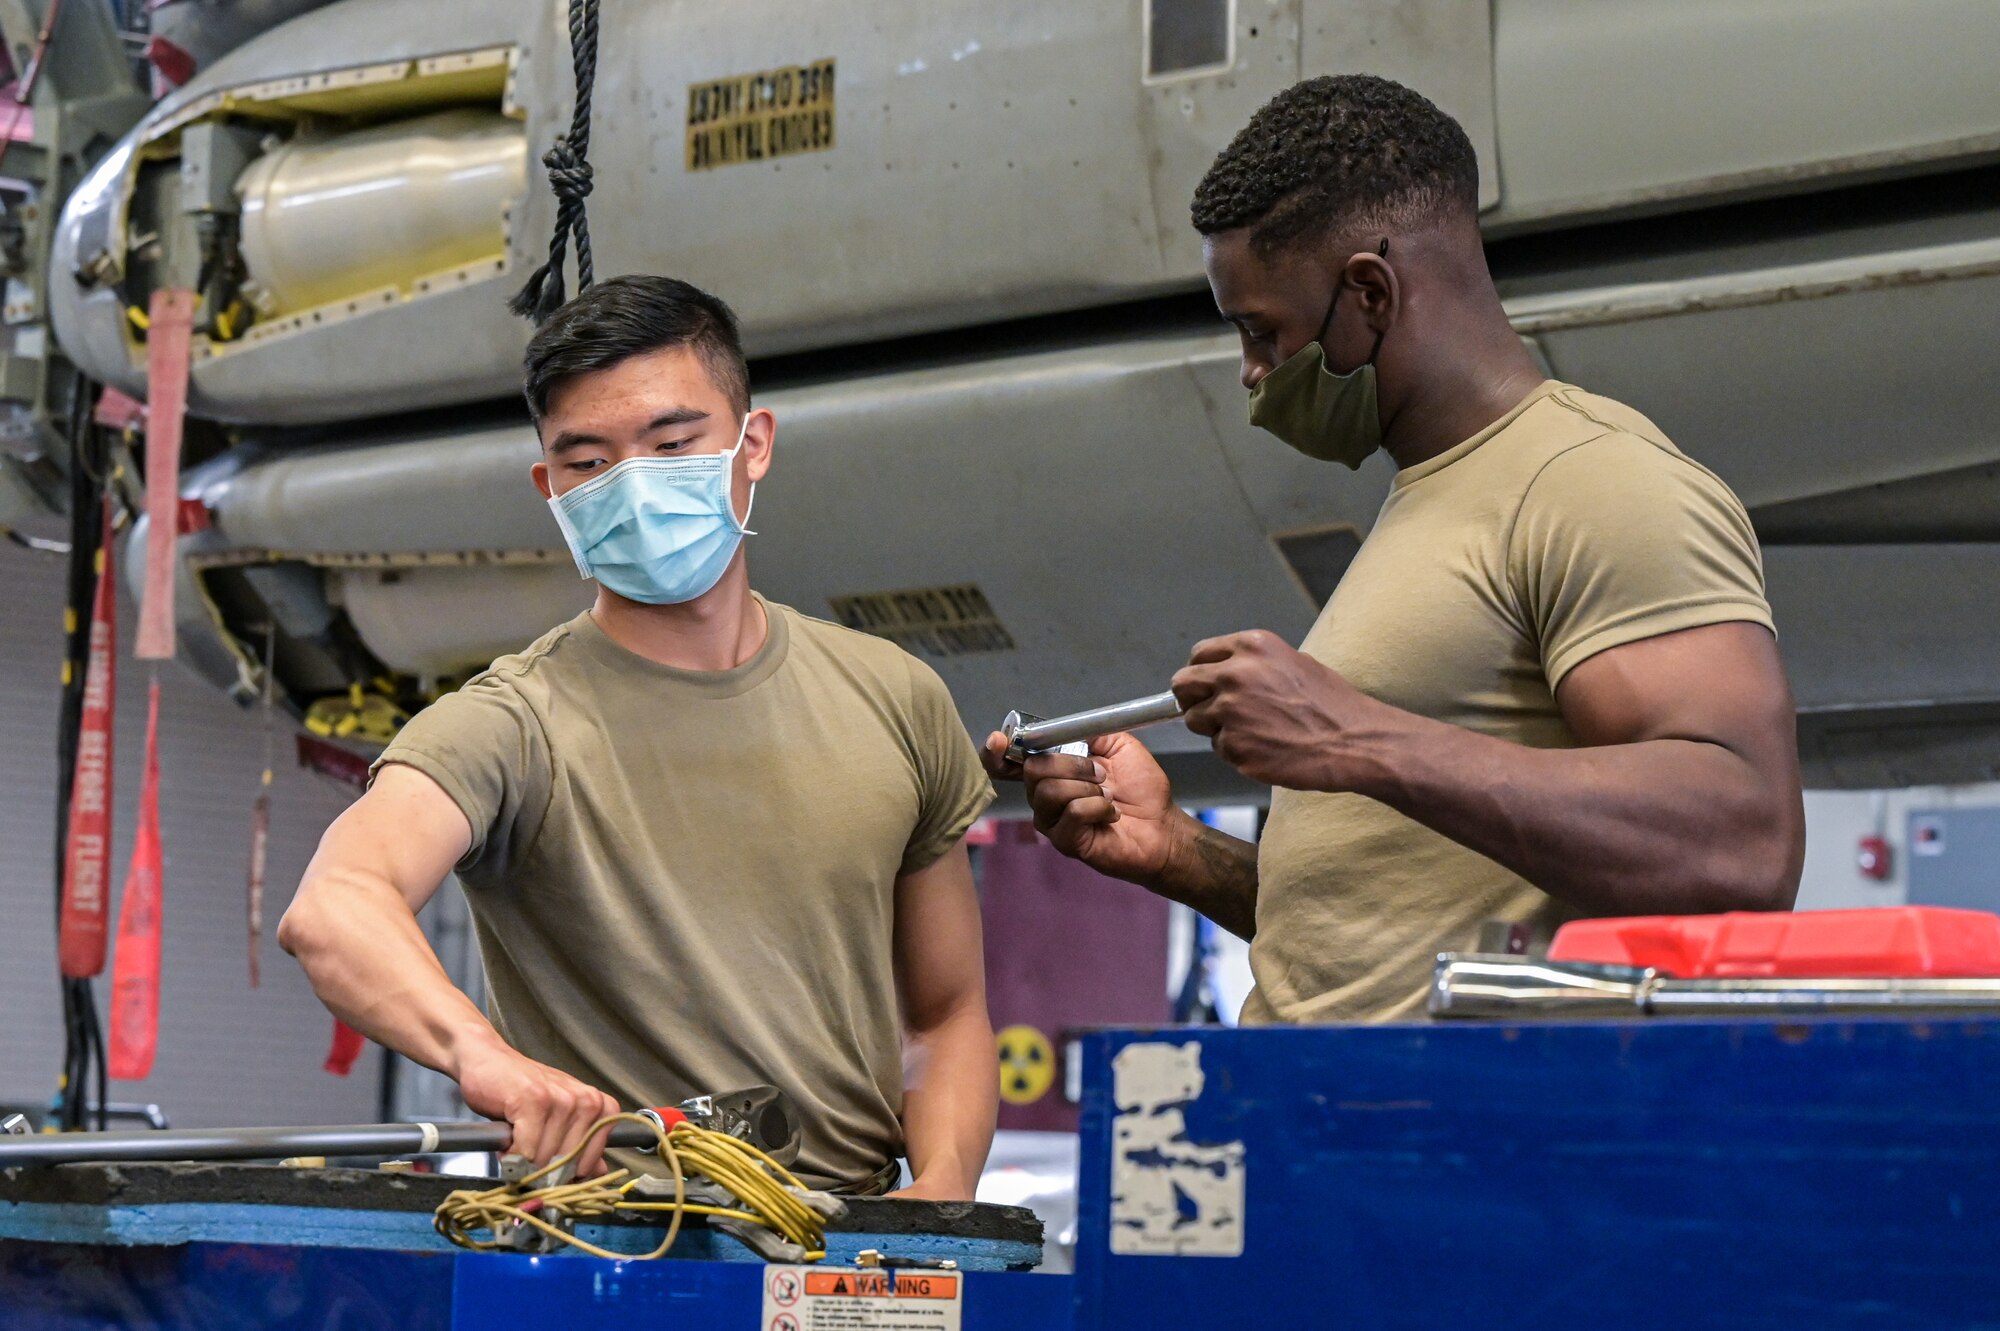 Senior Airman Sterling Brooks, 2nd Munitions Squadron weapons maintenance team member, and Airman 1st Class, Paxton Liu, 2nd MUNS weapons maintenance team member, organize tools used to conduct maintenance on the Air-launched Cruise Missile at Barksdale Air Force Base, Louisiana, Oct. 20, 2021. The exercise was conducted to observe the readiness capabilities of Airmen during a real life scenario. (U.S. Air Force photo by Airman 1st Class Jonathan E. Ramos)